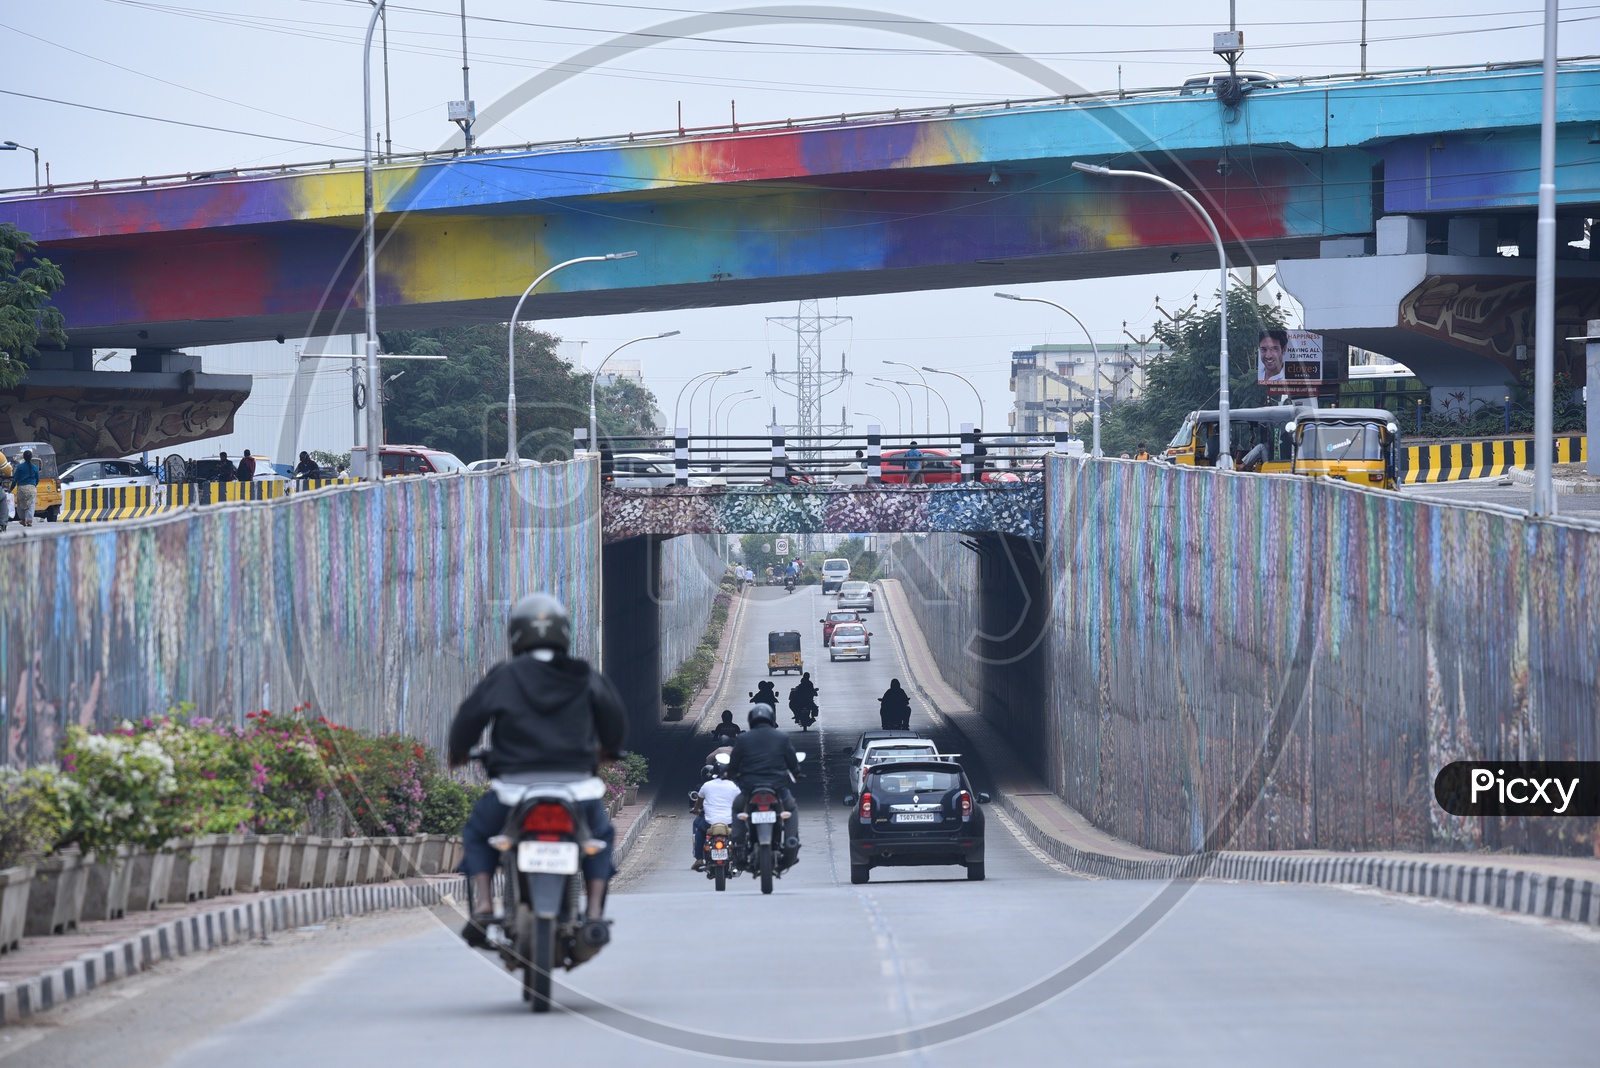 Vehicles Passing By a Underpass in Hyderabad